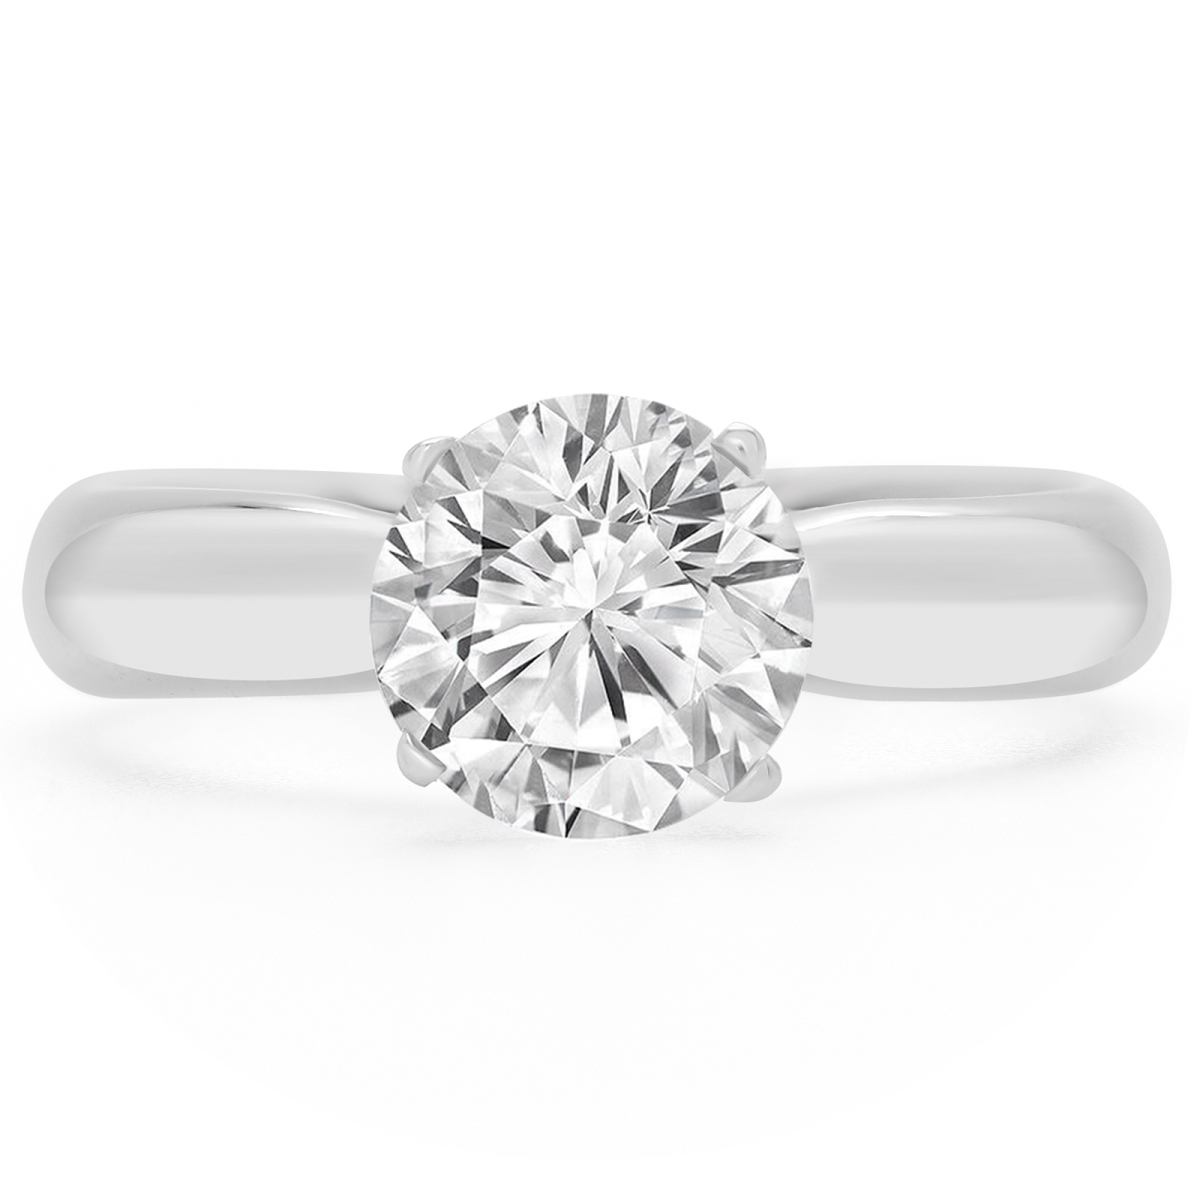 Picture of Majesty Diamonds MD190197-P 0.4 CT Round Diamond Solitaire Engagement Ring in 14K White Gold